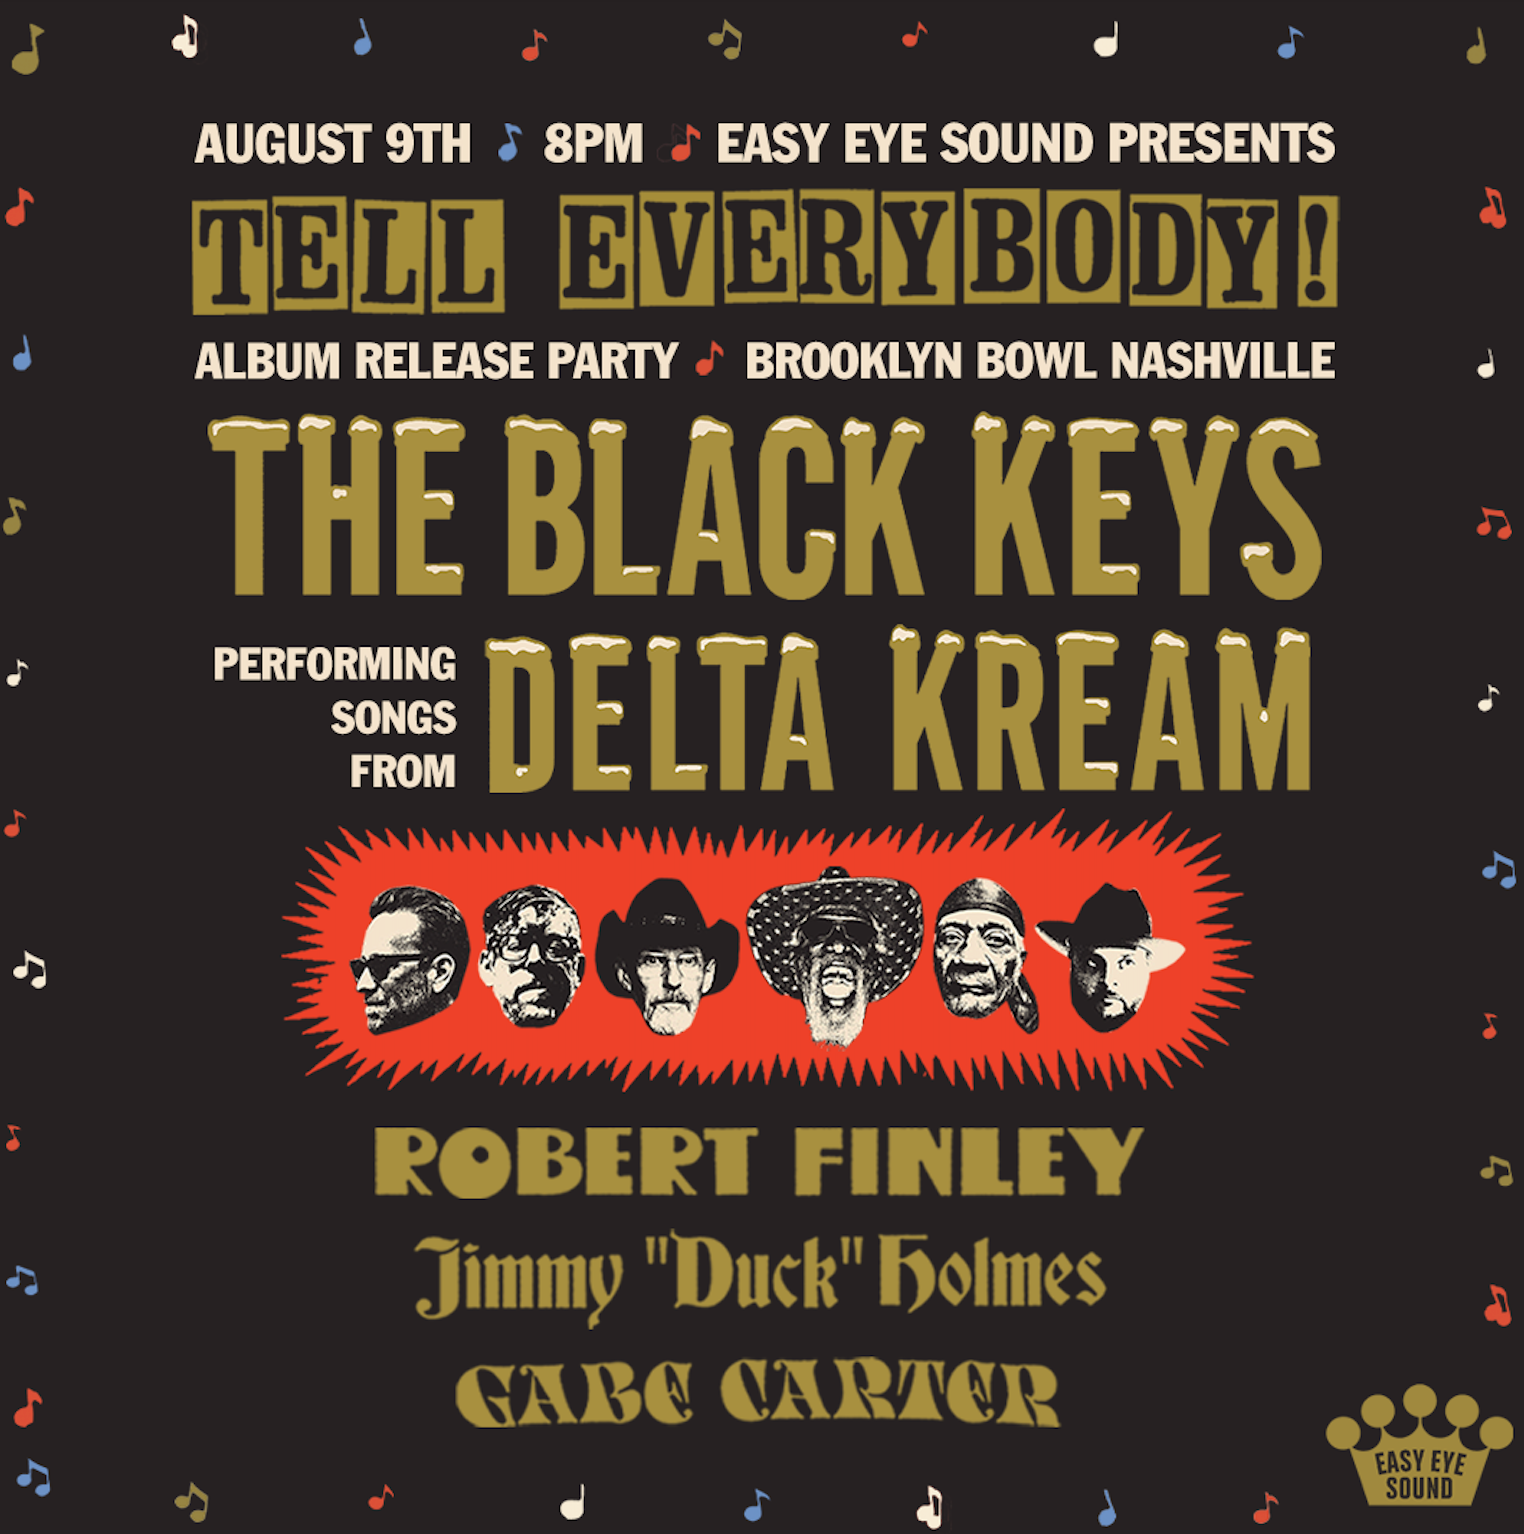 EASY EYE SOUNDS PRESENTS 'TELL EVERYBODY!' ALBUM RELEASE PARTY AT BROOKLYN BOWL NASHVILLE